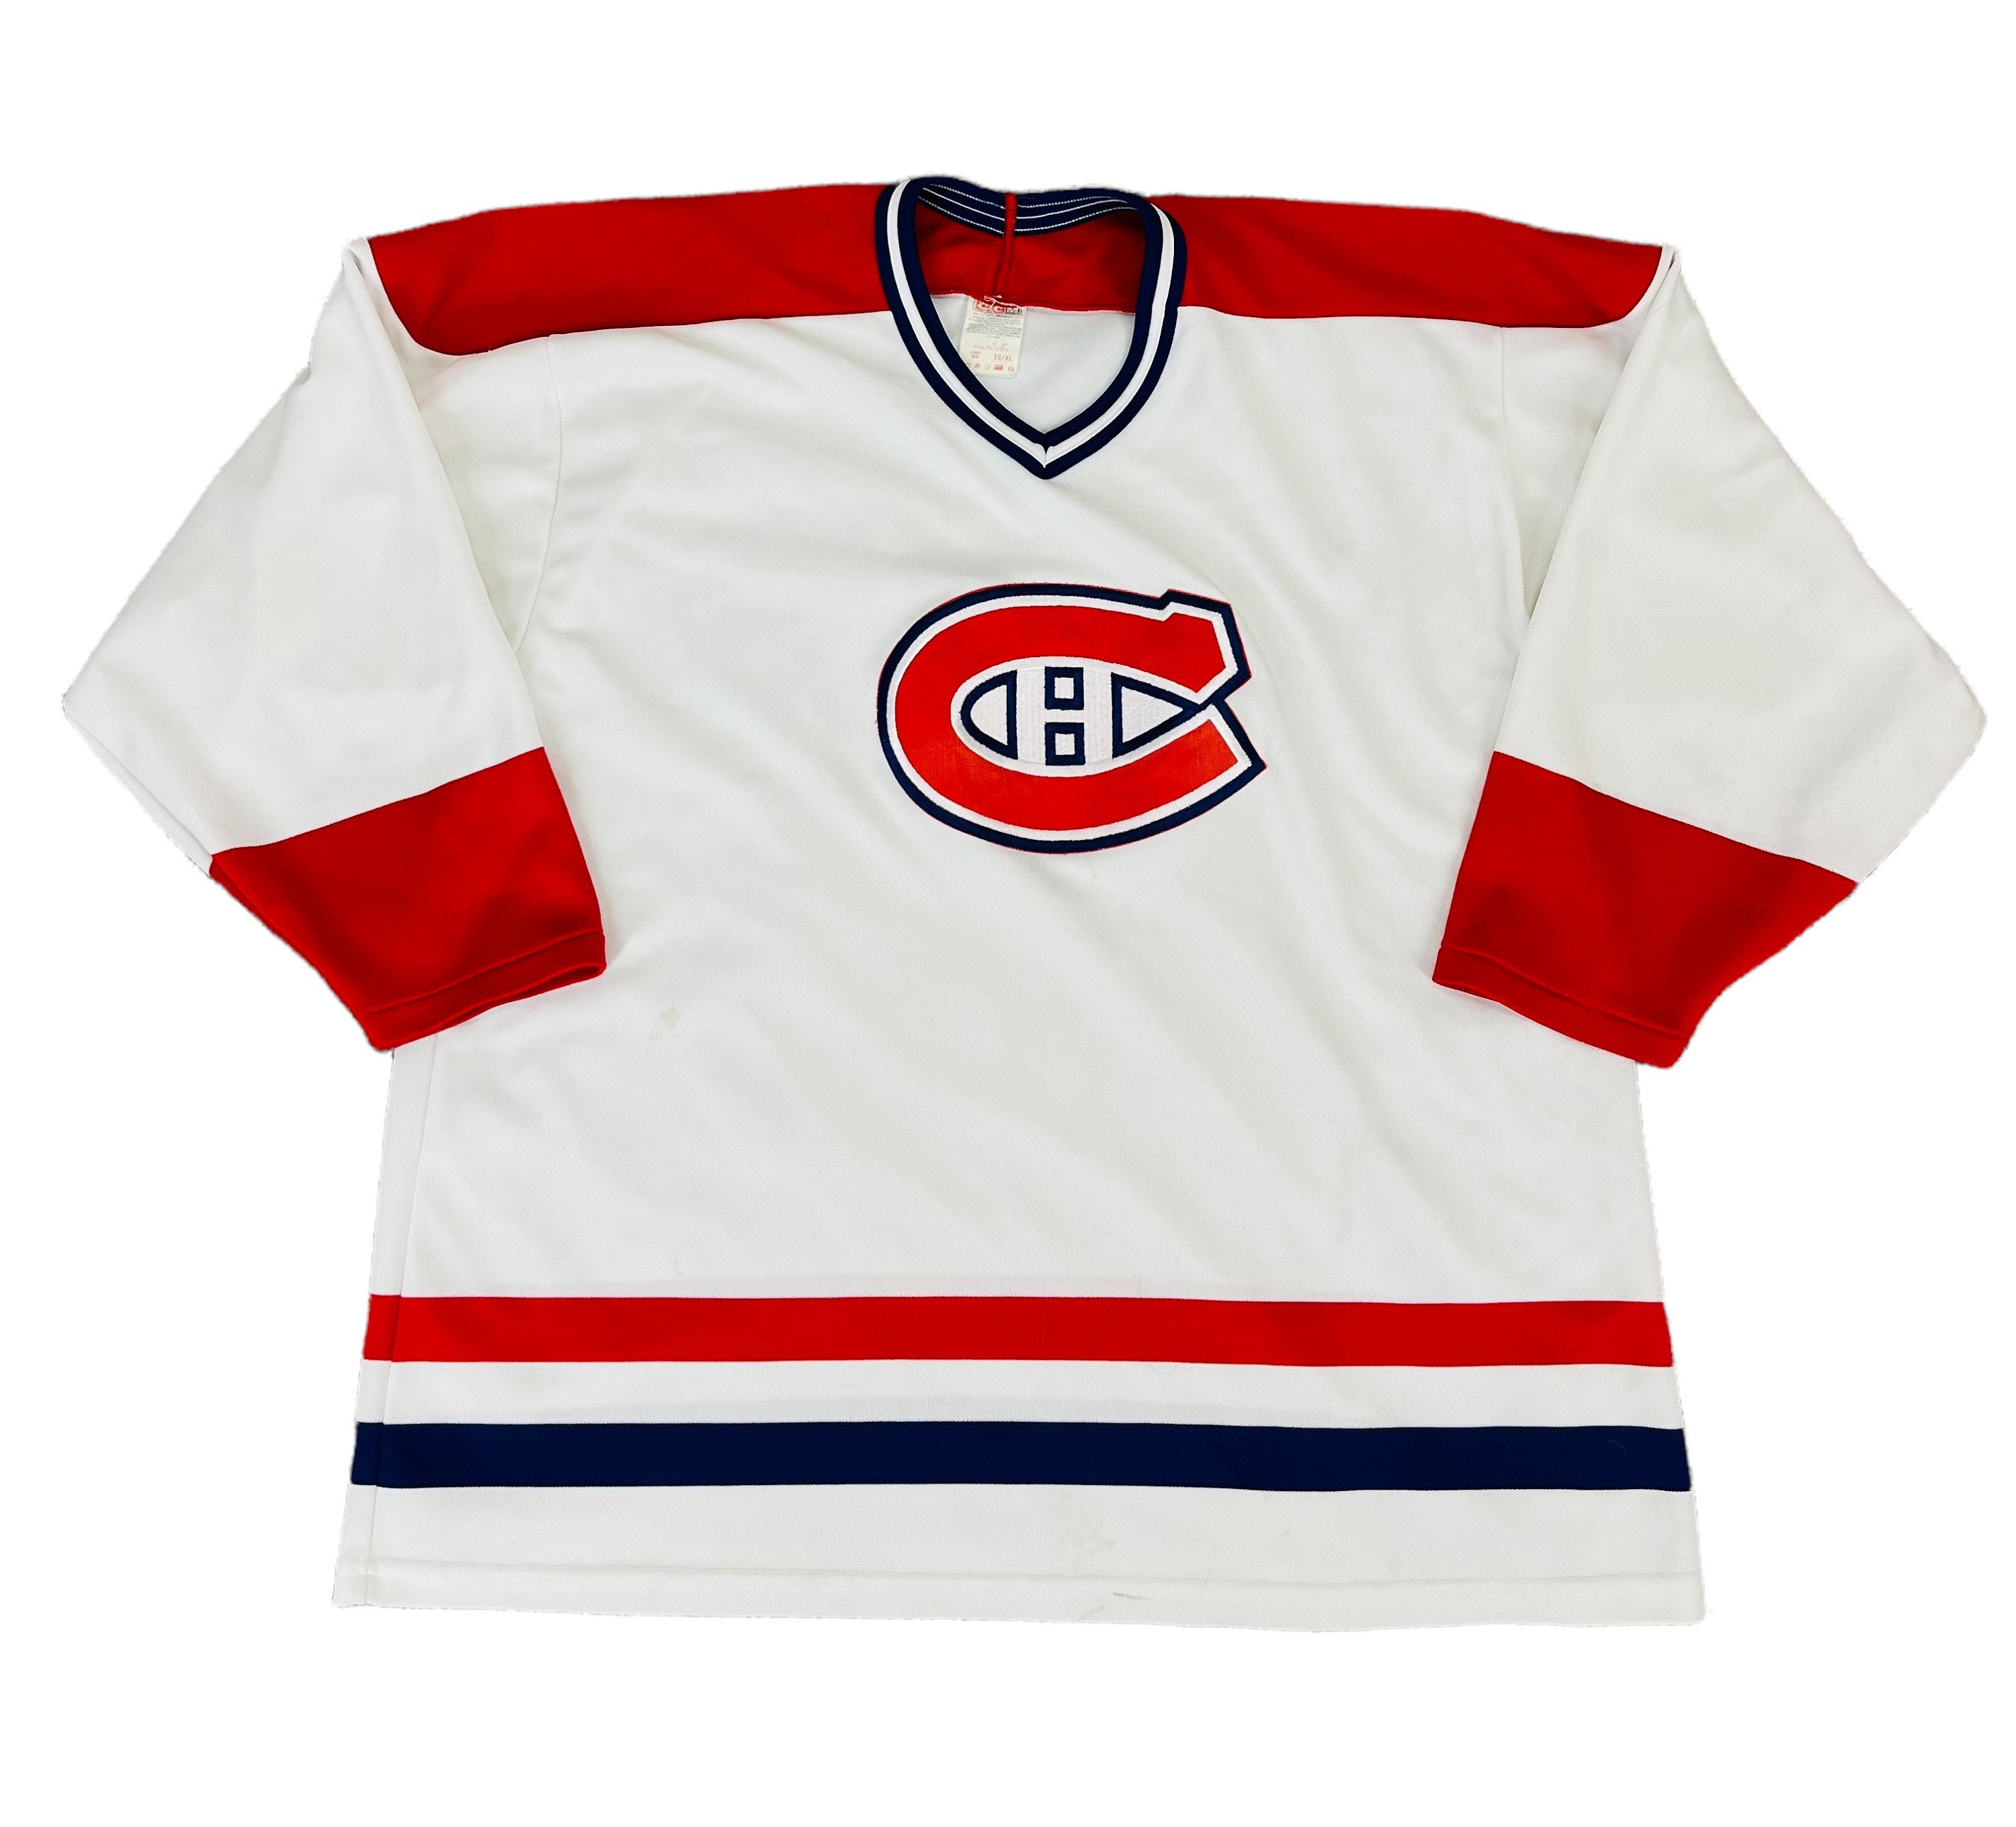 Vintage Montreal Canadiens Reebok Hockey Jersey Red and Blue Uniform Nhl  Licen